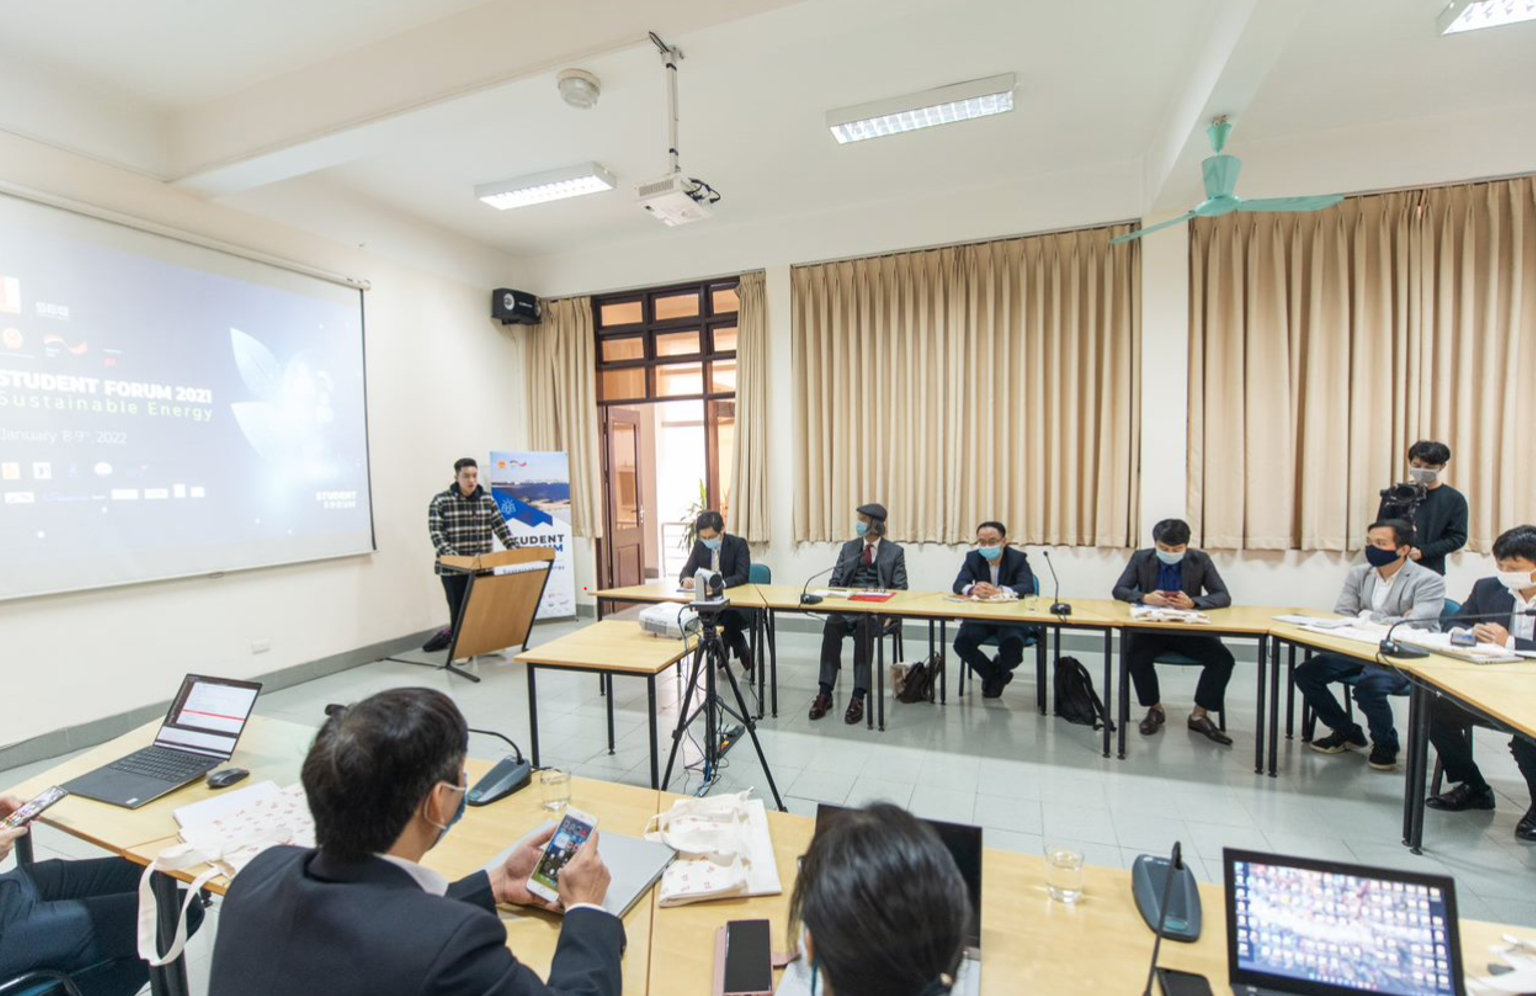 Students presented their research to supervisors (Source: GIZ Viet Nam)